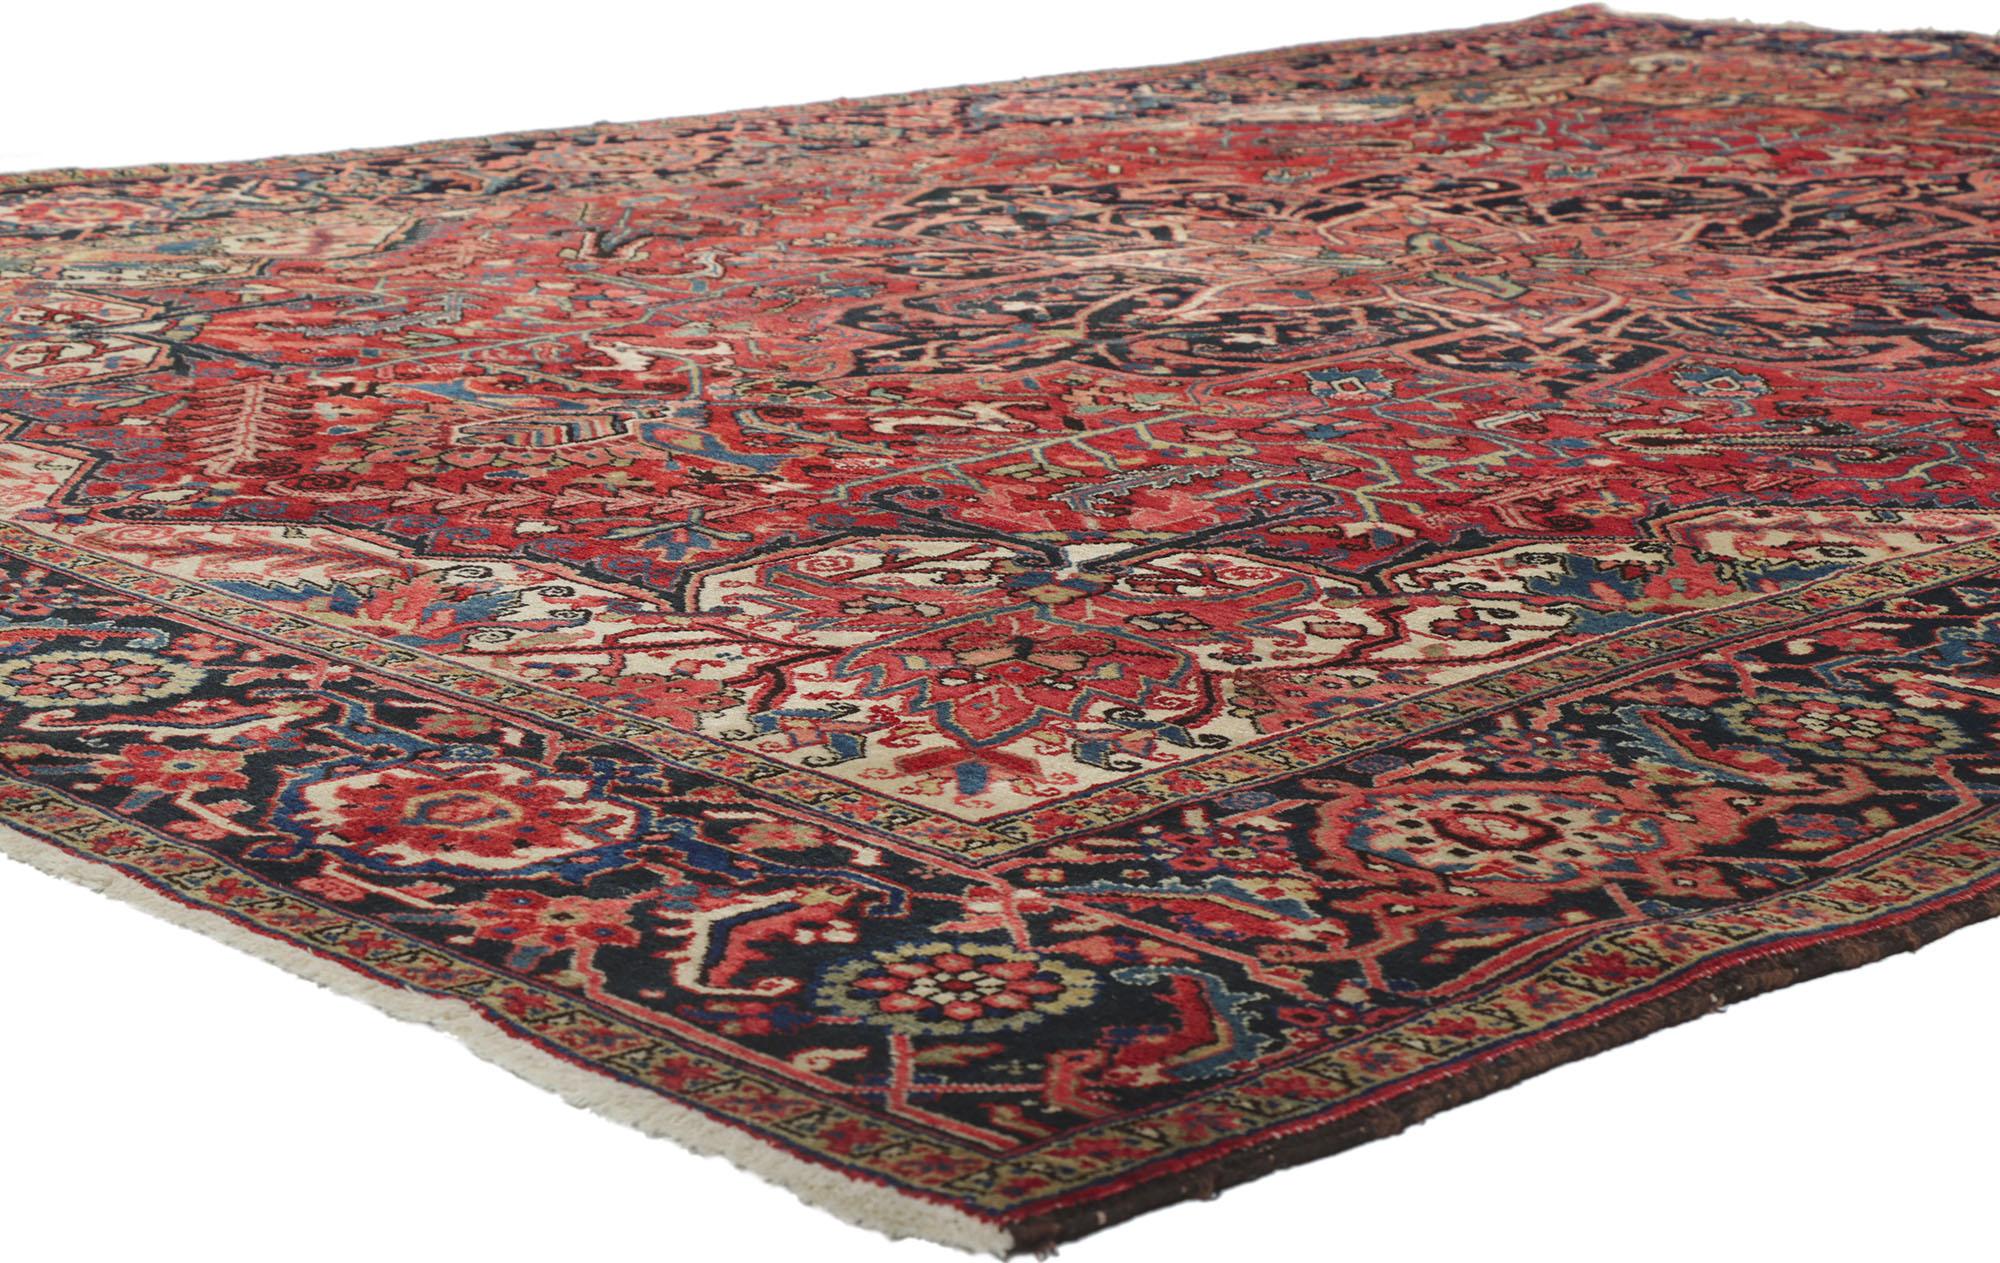 78222 antique Persian Heriz rug, measures: 08'08 x 12'00.
Rendered in variegated shades of red, navy blue, cerulean, tan, taupe, beige, sand, royal blue, pinkish-coral, and black coffee with other accent colors. Desirable Age Wear. Abrash.